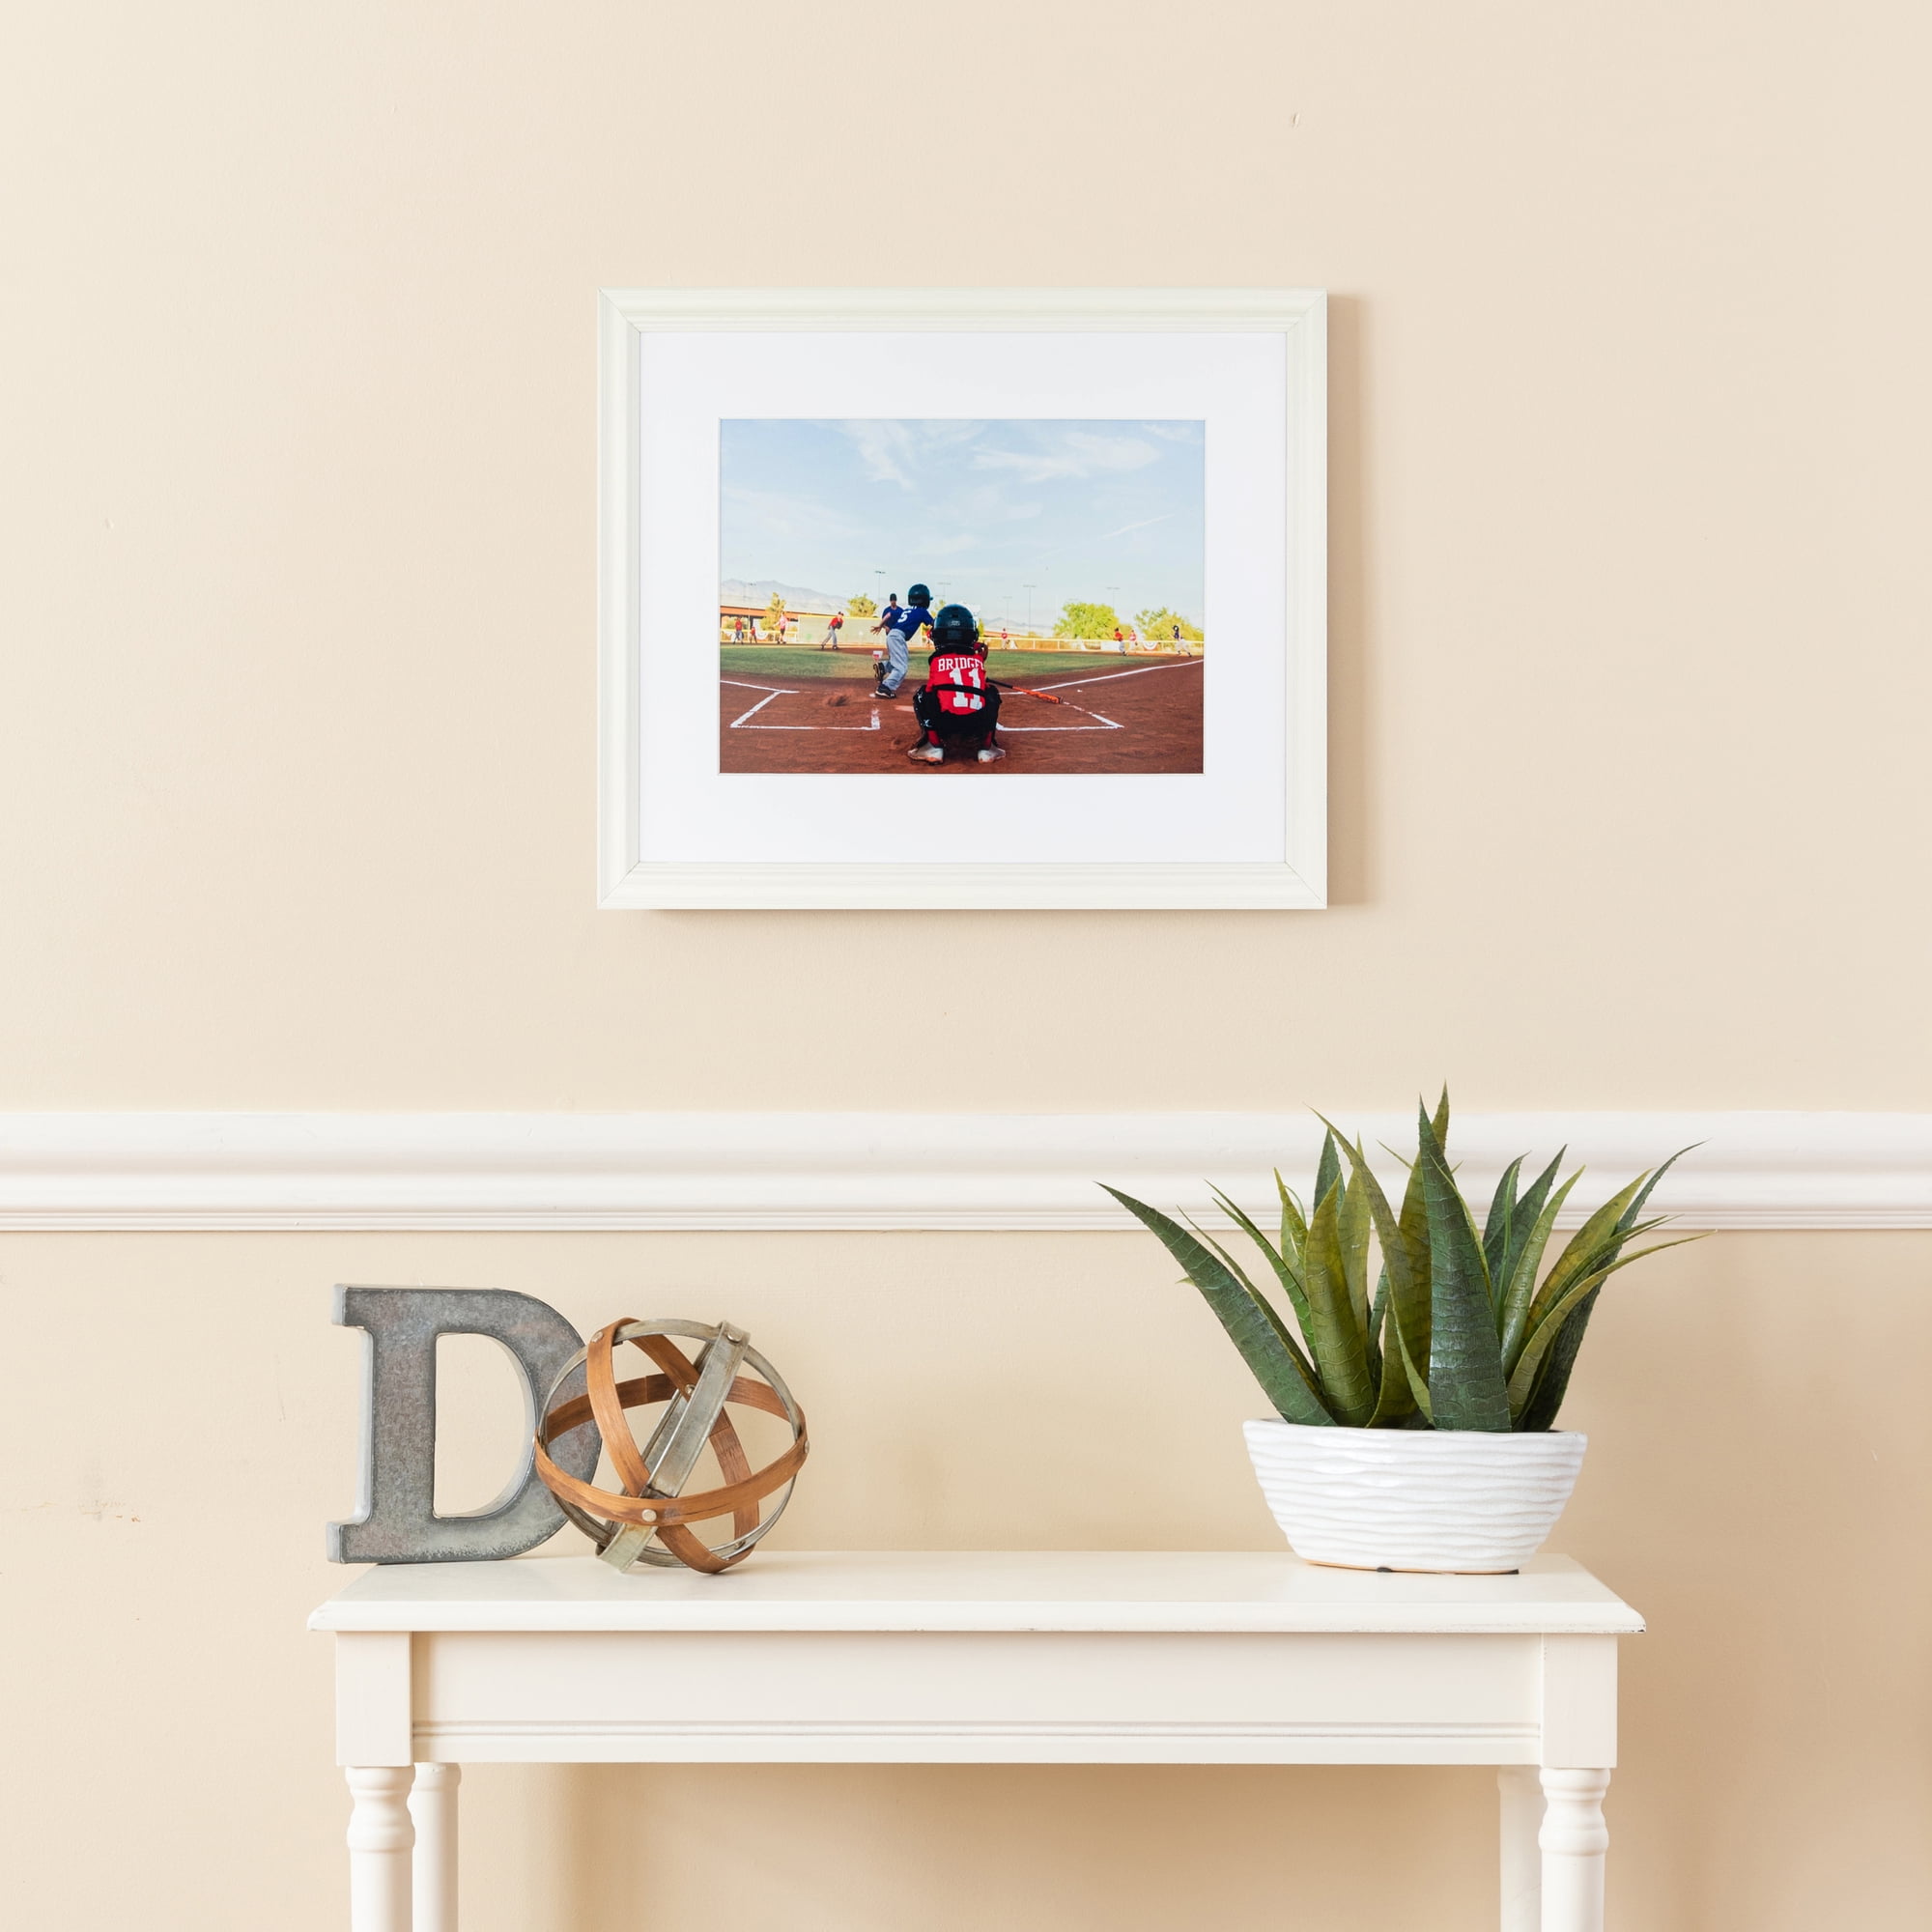 Wide Angled Modern Red Picture Frame - Yahoo Shopping